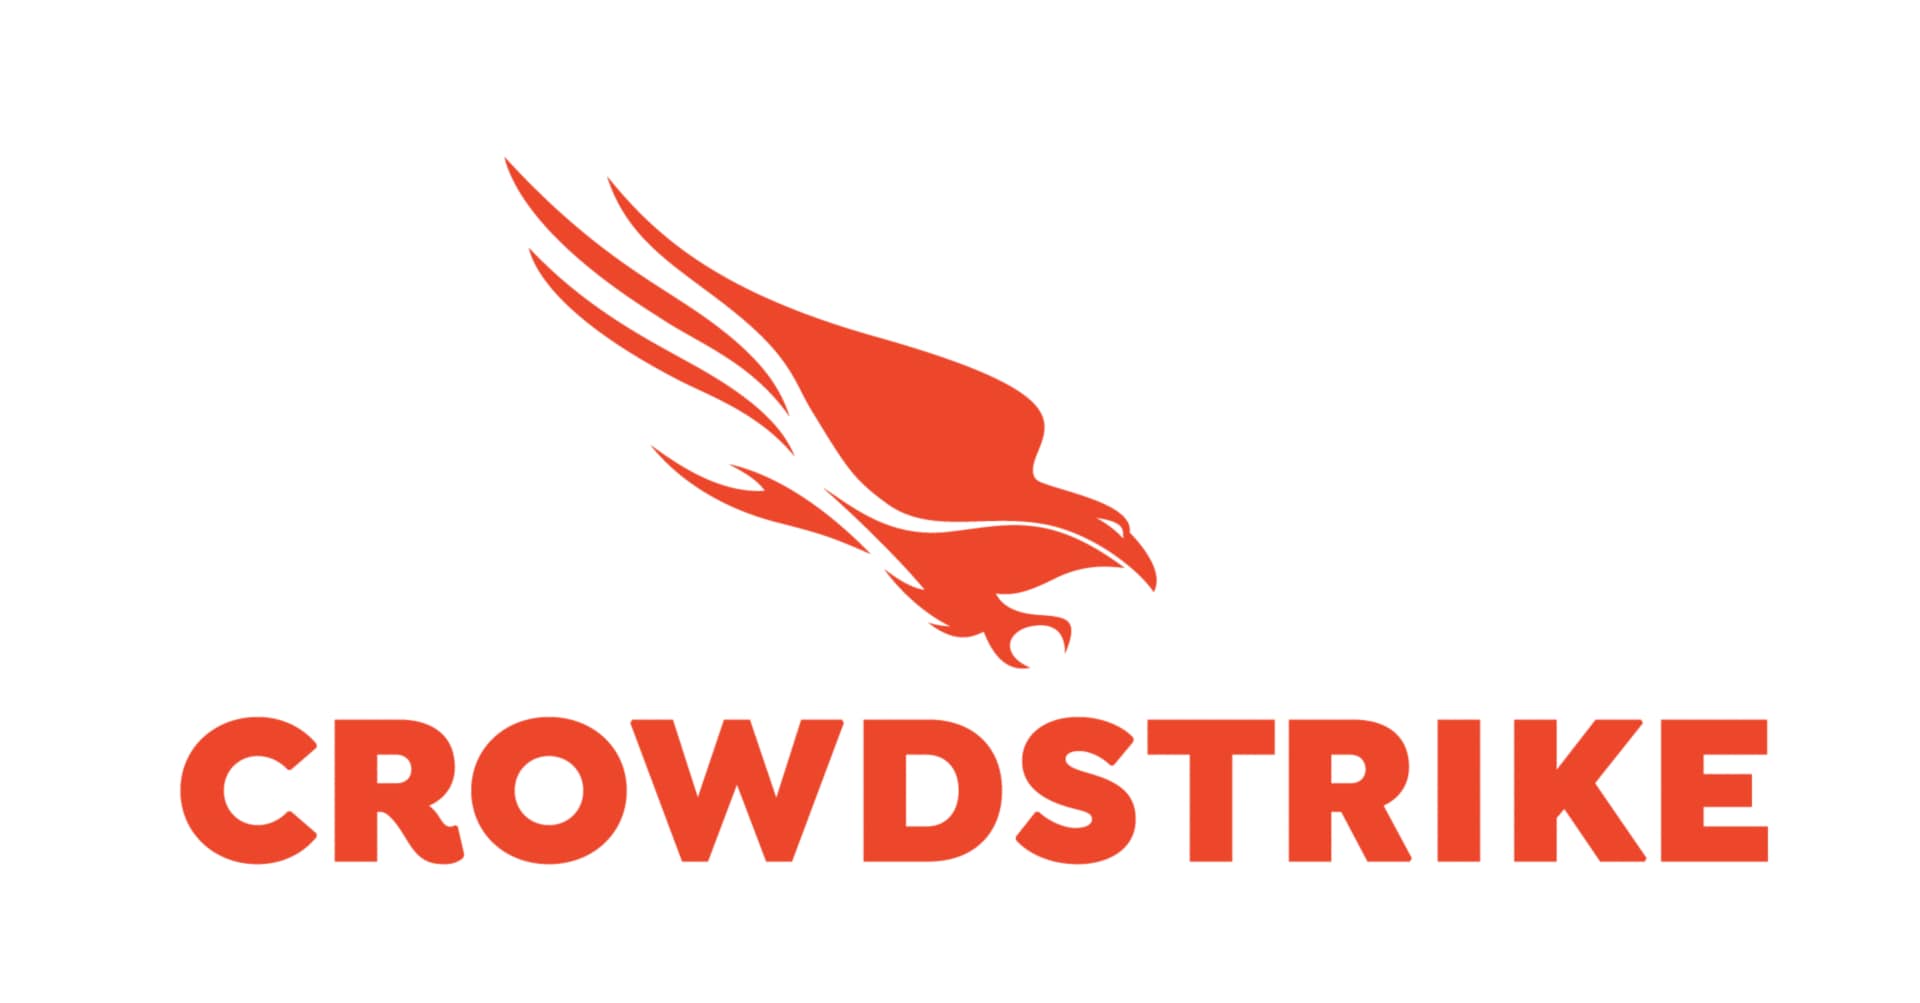 CrowdStrike 12-Month Falcon Overwatch Service (300-499 Licenses)